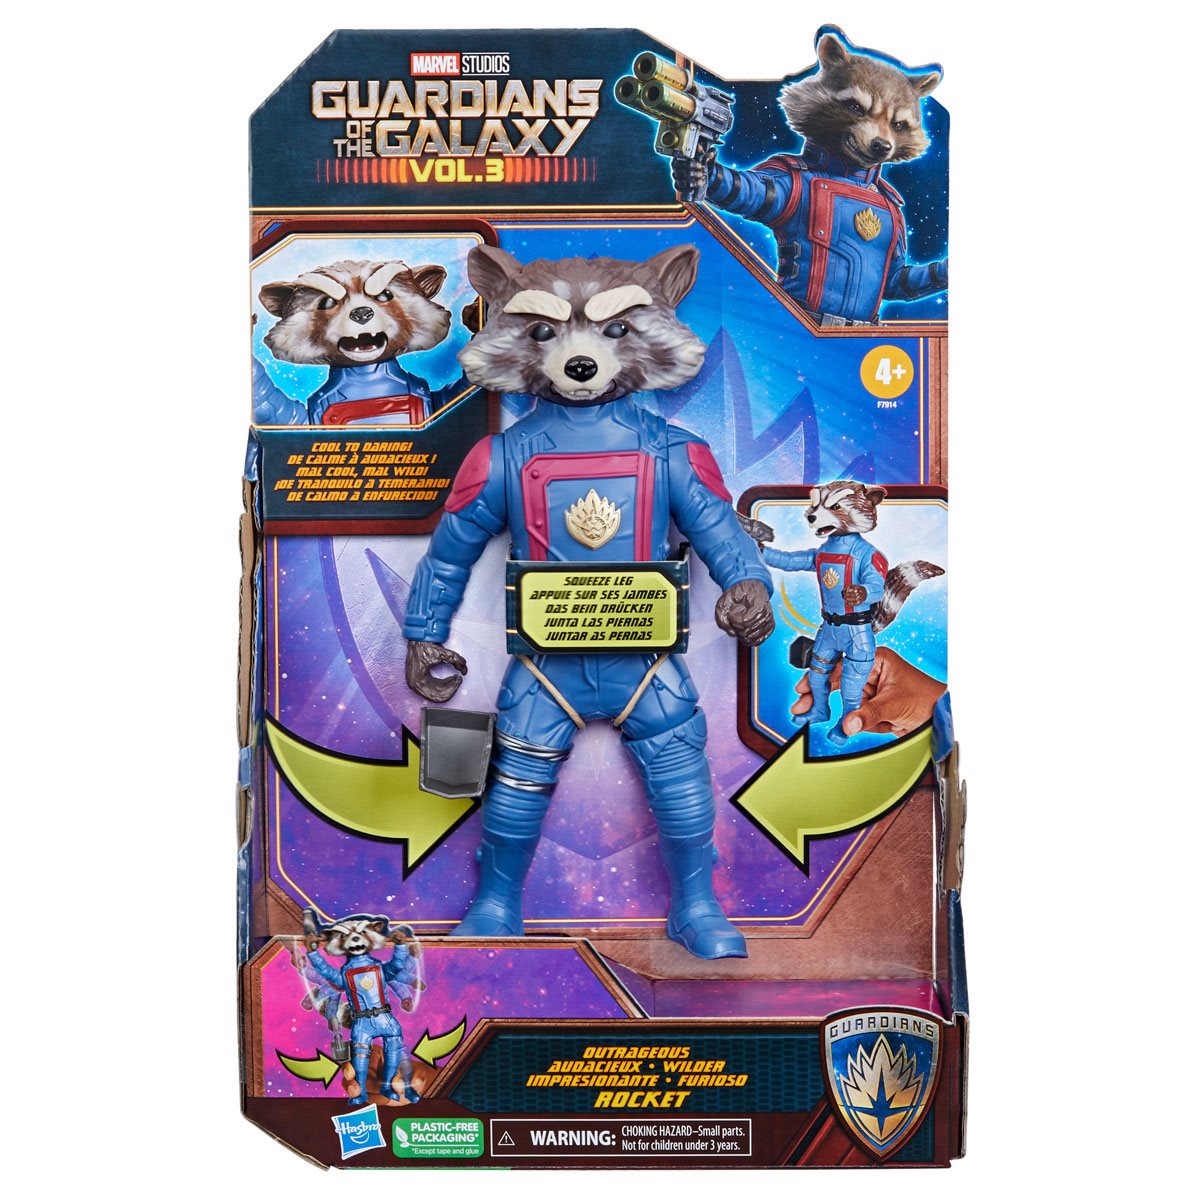 Guardians of the Galaxy Outrageous Rocket